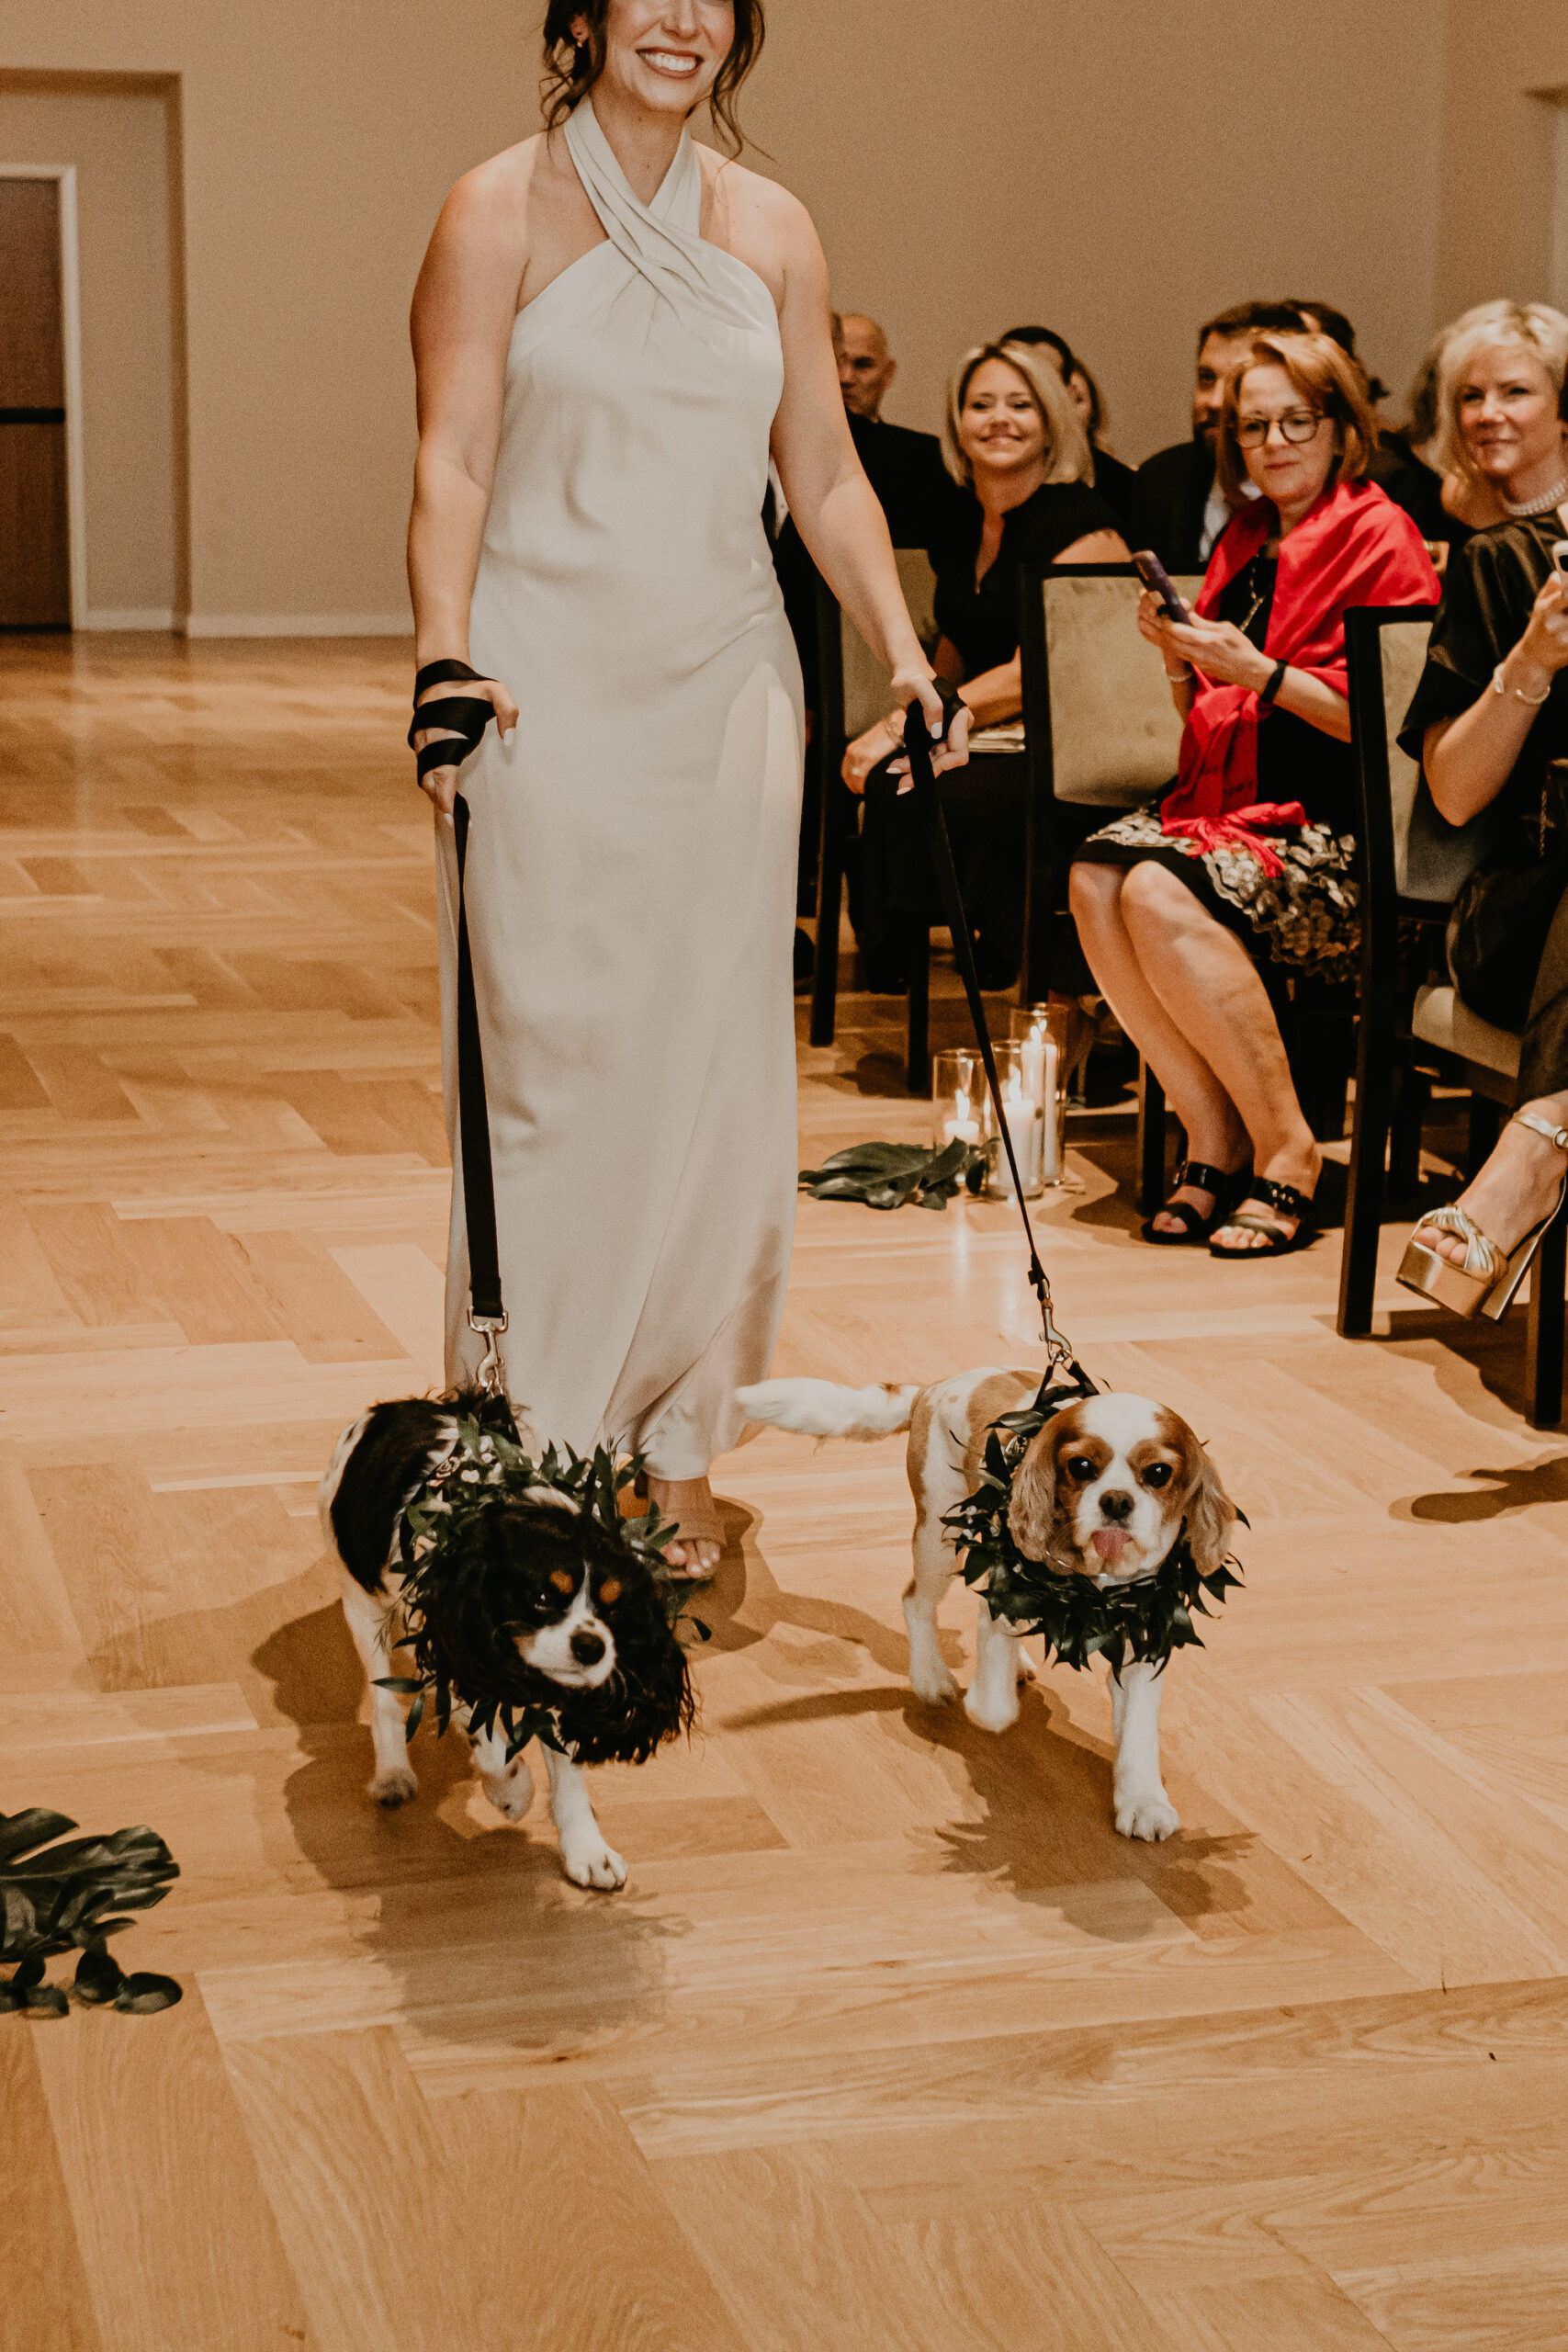 Dogs Walking Down the Wedding Ceremony Aisle | Tampa Bay Pet Handler Fairytail Pet Care